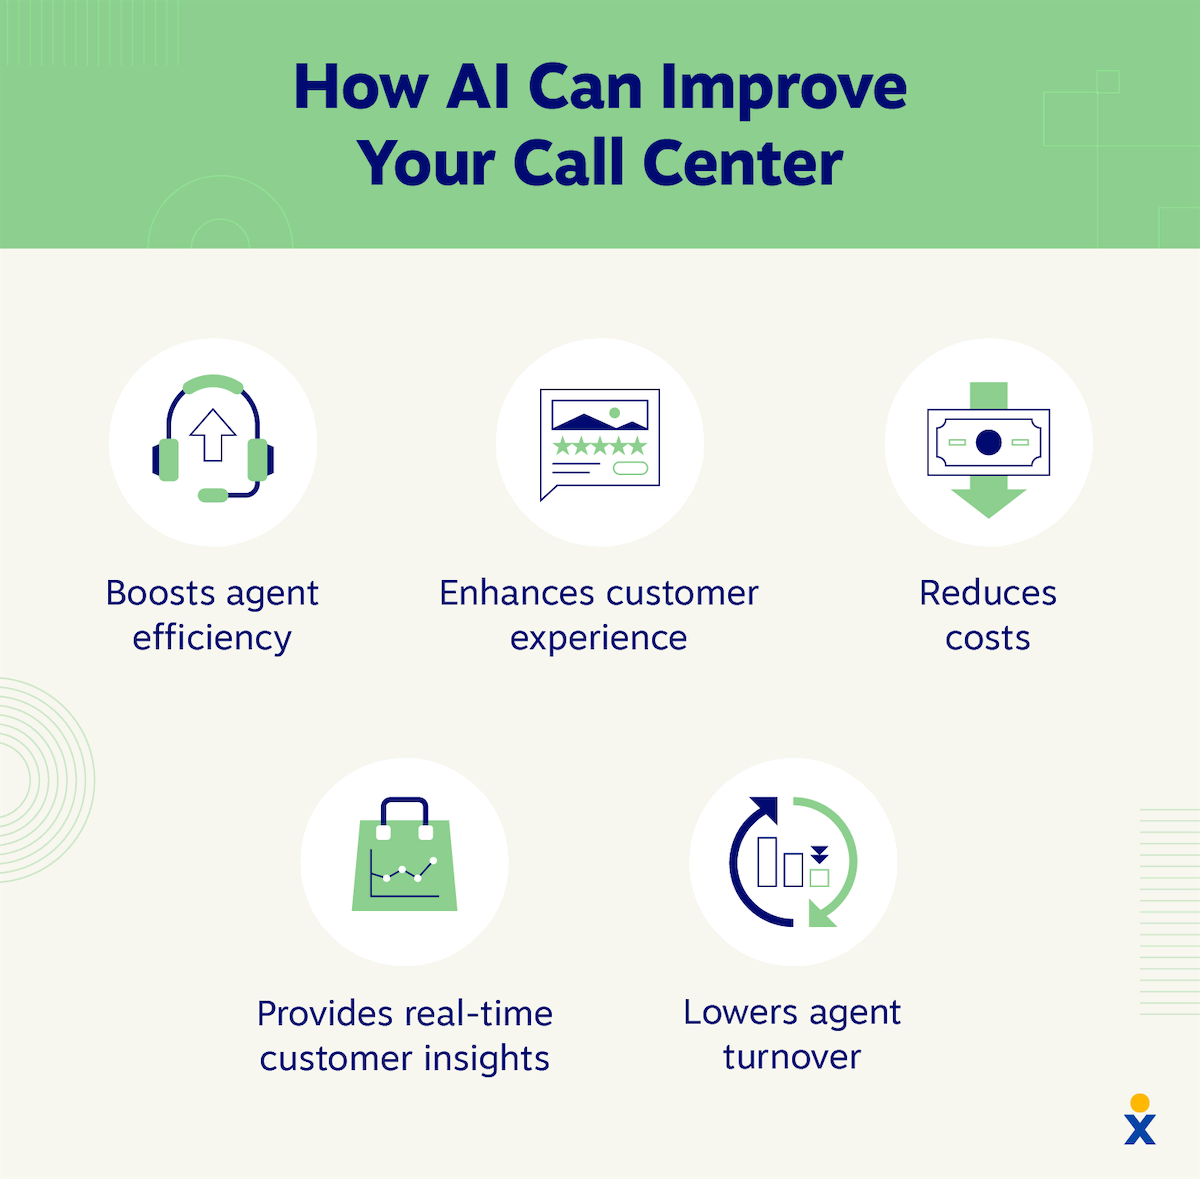 Five ways AI can improve call center efficiency